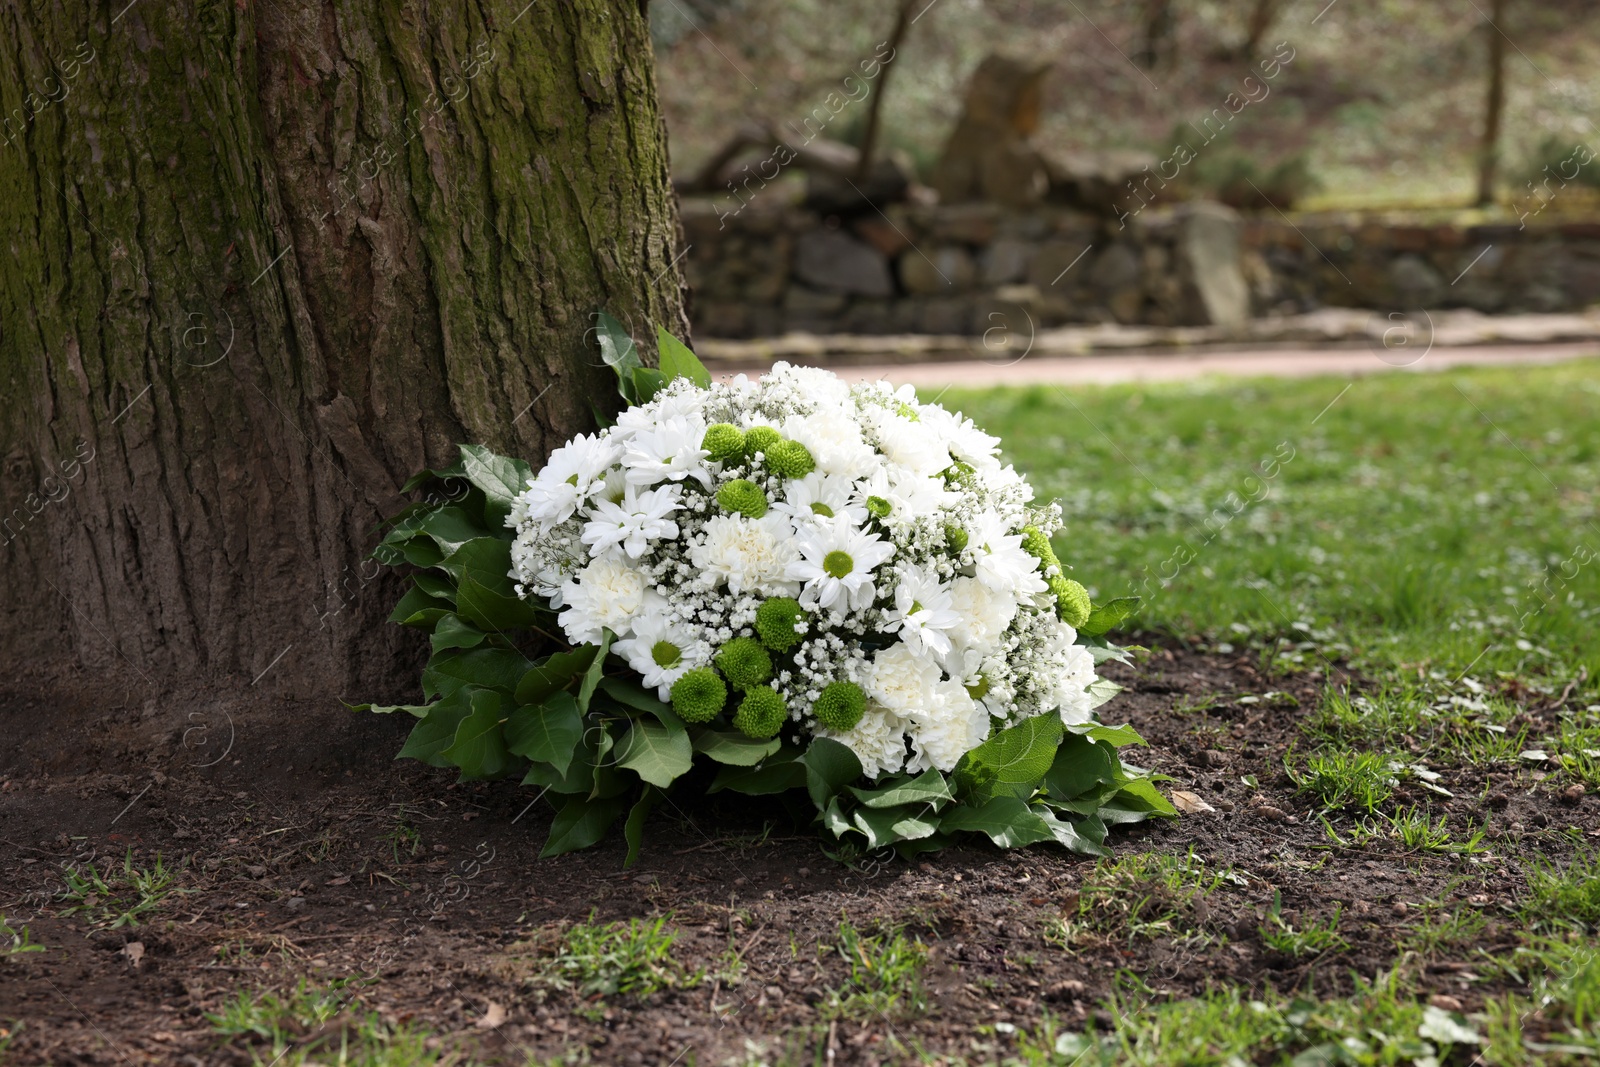 Photo of Funeral wreath of flowers near tree outdoors